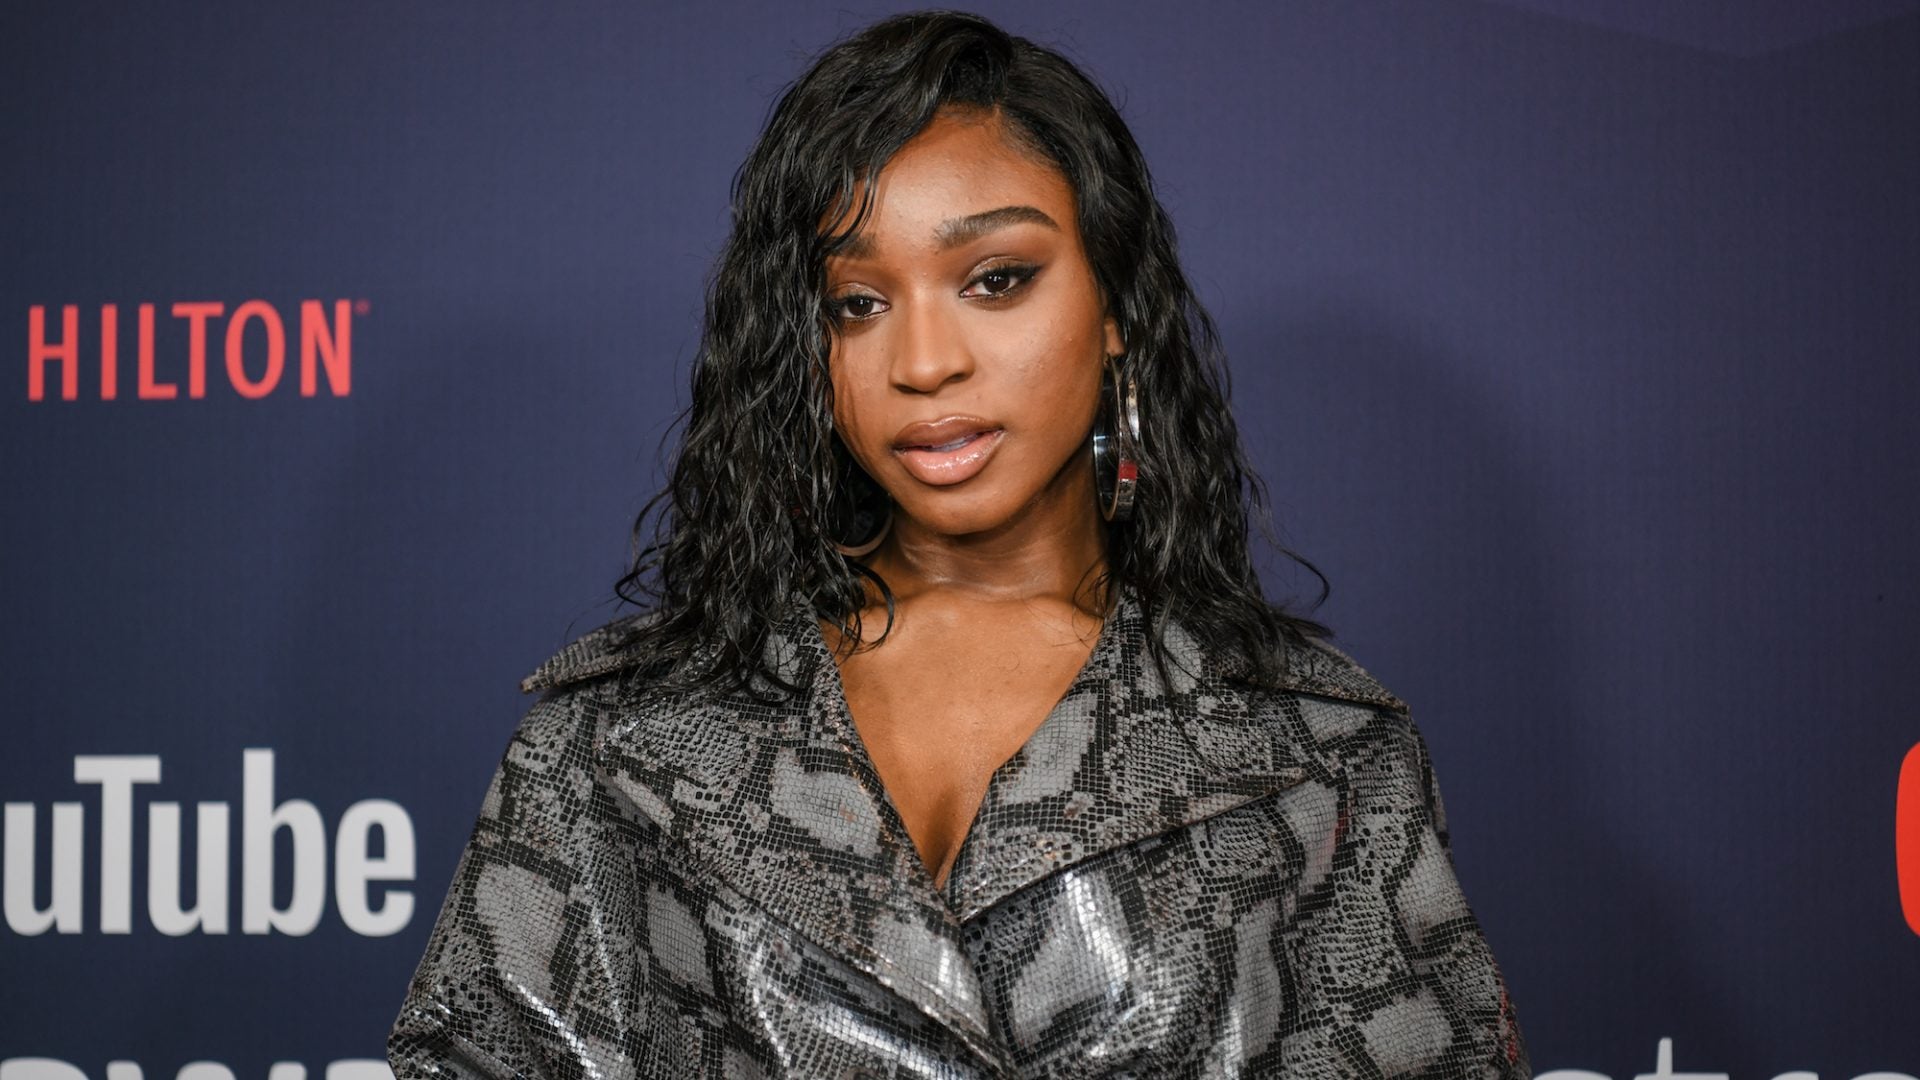 Normani Opens Up About Former Fifth Harmony Bandmate Camila Cabello’s Racist Social Media Posts